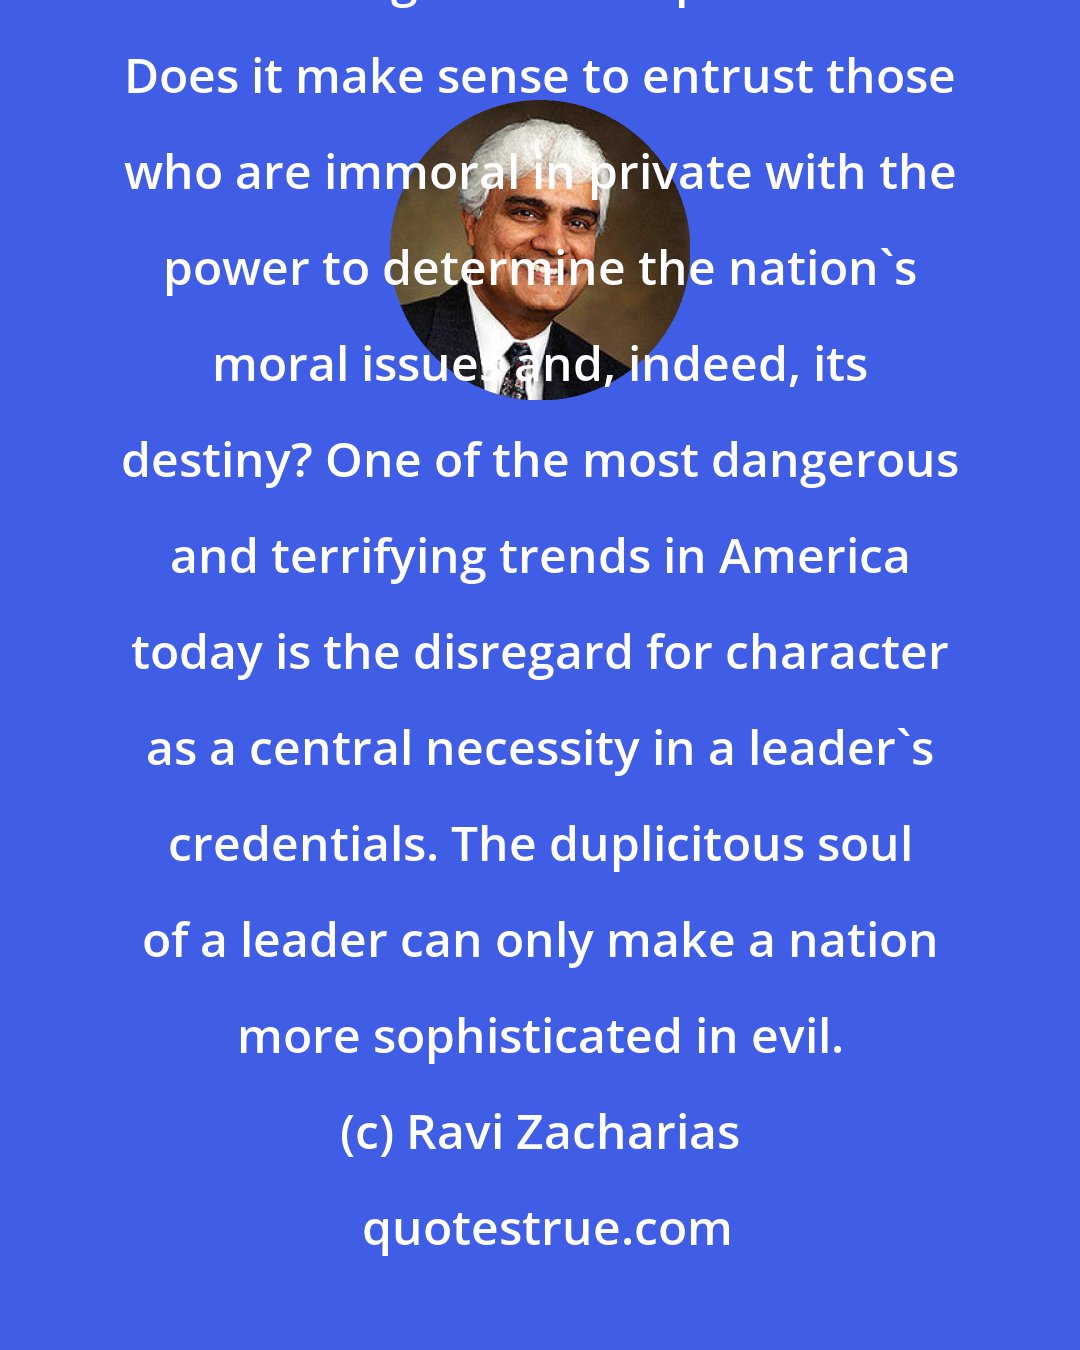 Ravi Zacharias: It is a mindless philosophy that assumes that one's private beliefs have nothing to do with public office. Does it make sense to entrust those who are immoral in private with the power to determine the nation's moral issues and, indeed, its destiny? One of the most dangerous and terrifying trends in America today is the disregard for character as a central necessity in a leader's credentials. The duplicitous soul of a leader can only make a nation more sophisticated in evil.